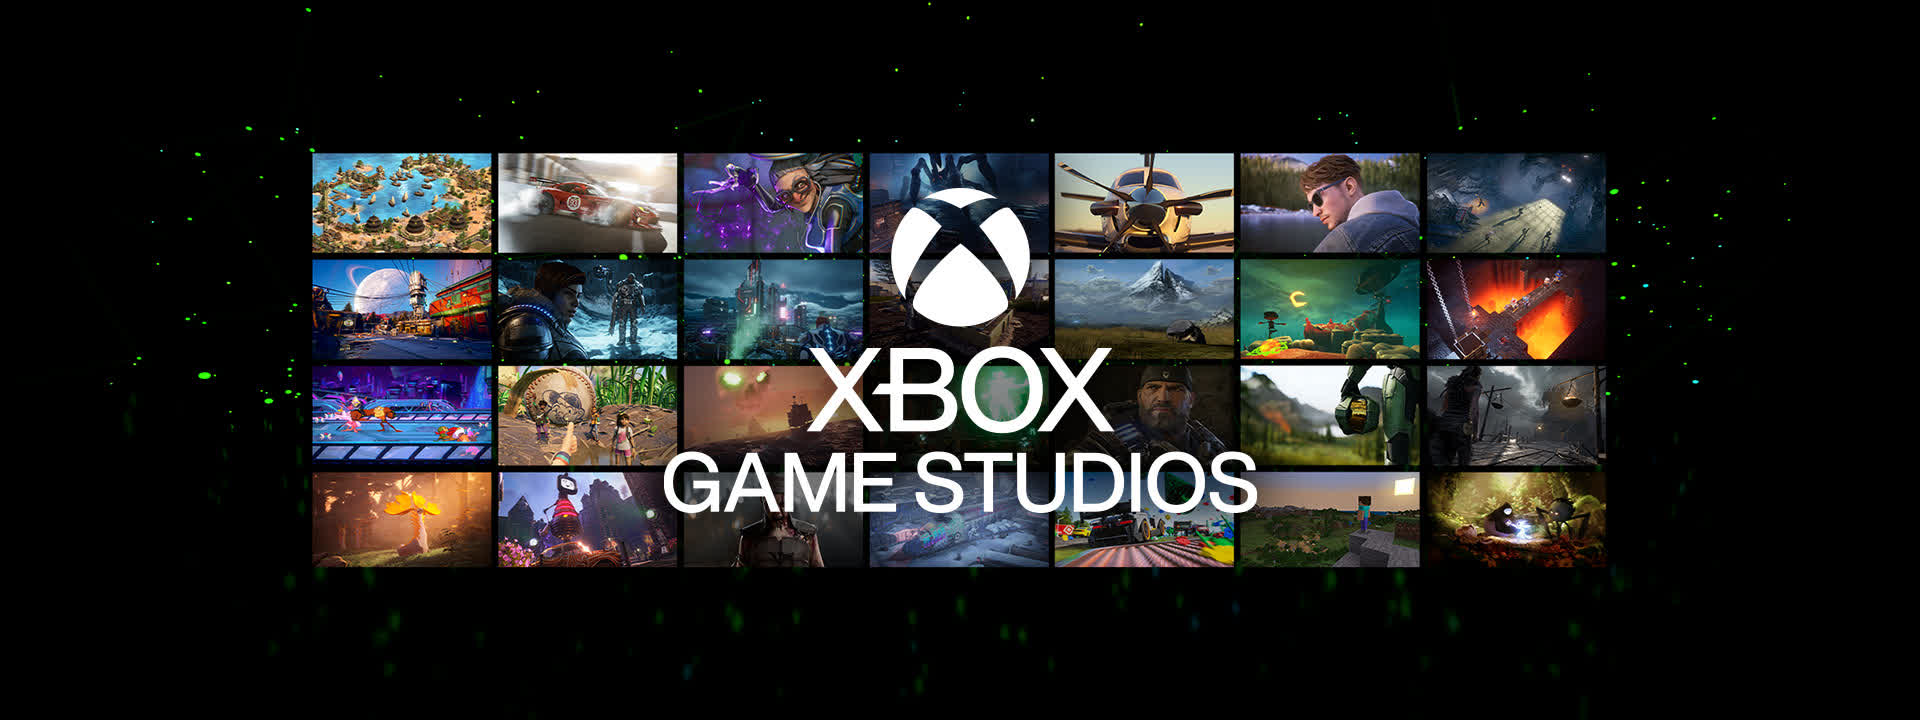 Five more game studios rumored to be snapped up by Microsoft